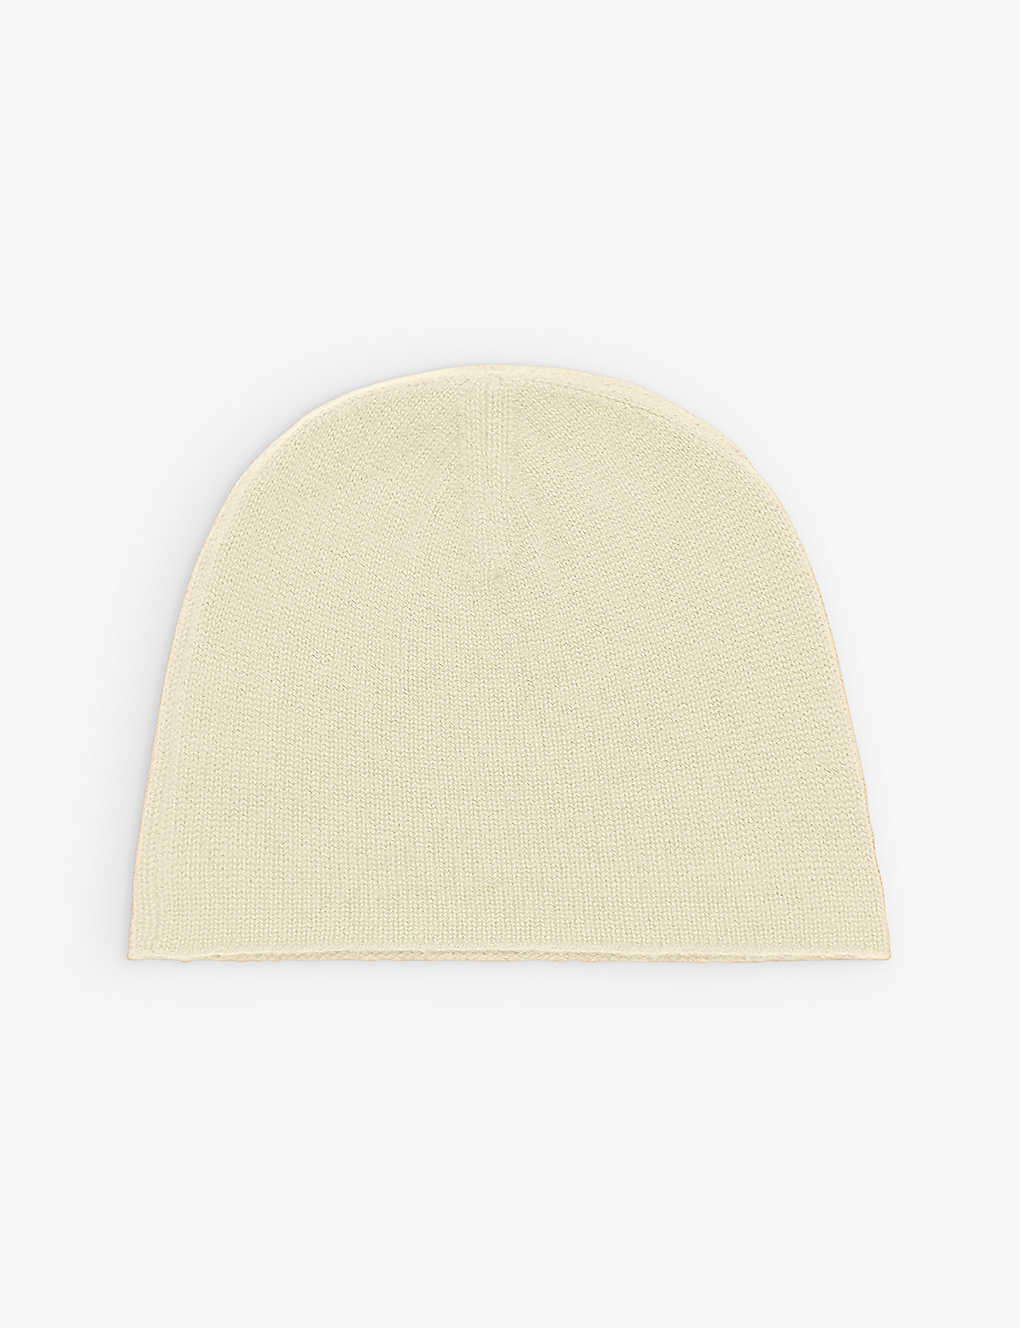 Joseph Womens Pale Olive Ribbed-knit Cashmere Beanie Hat